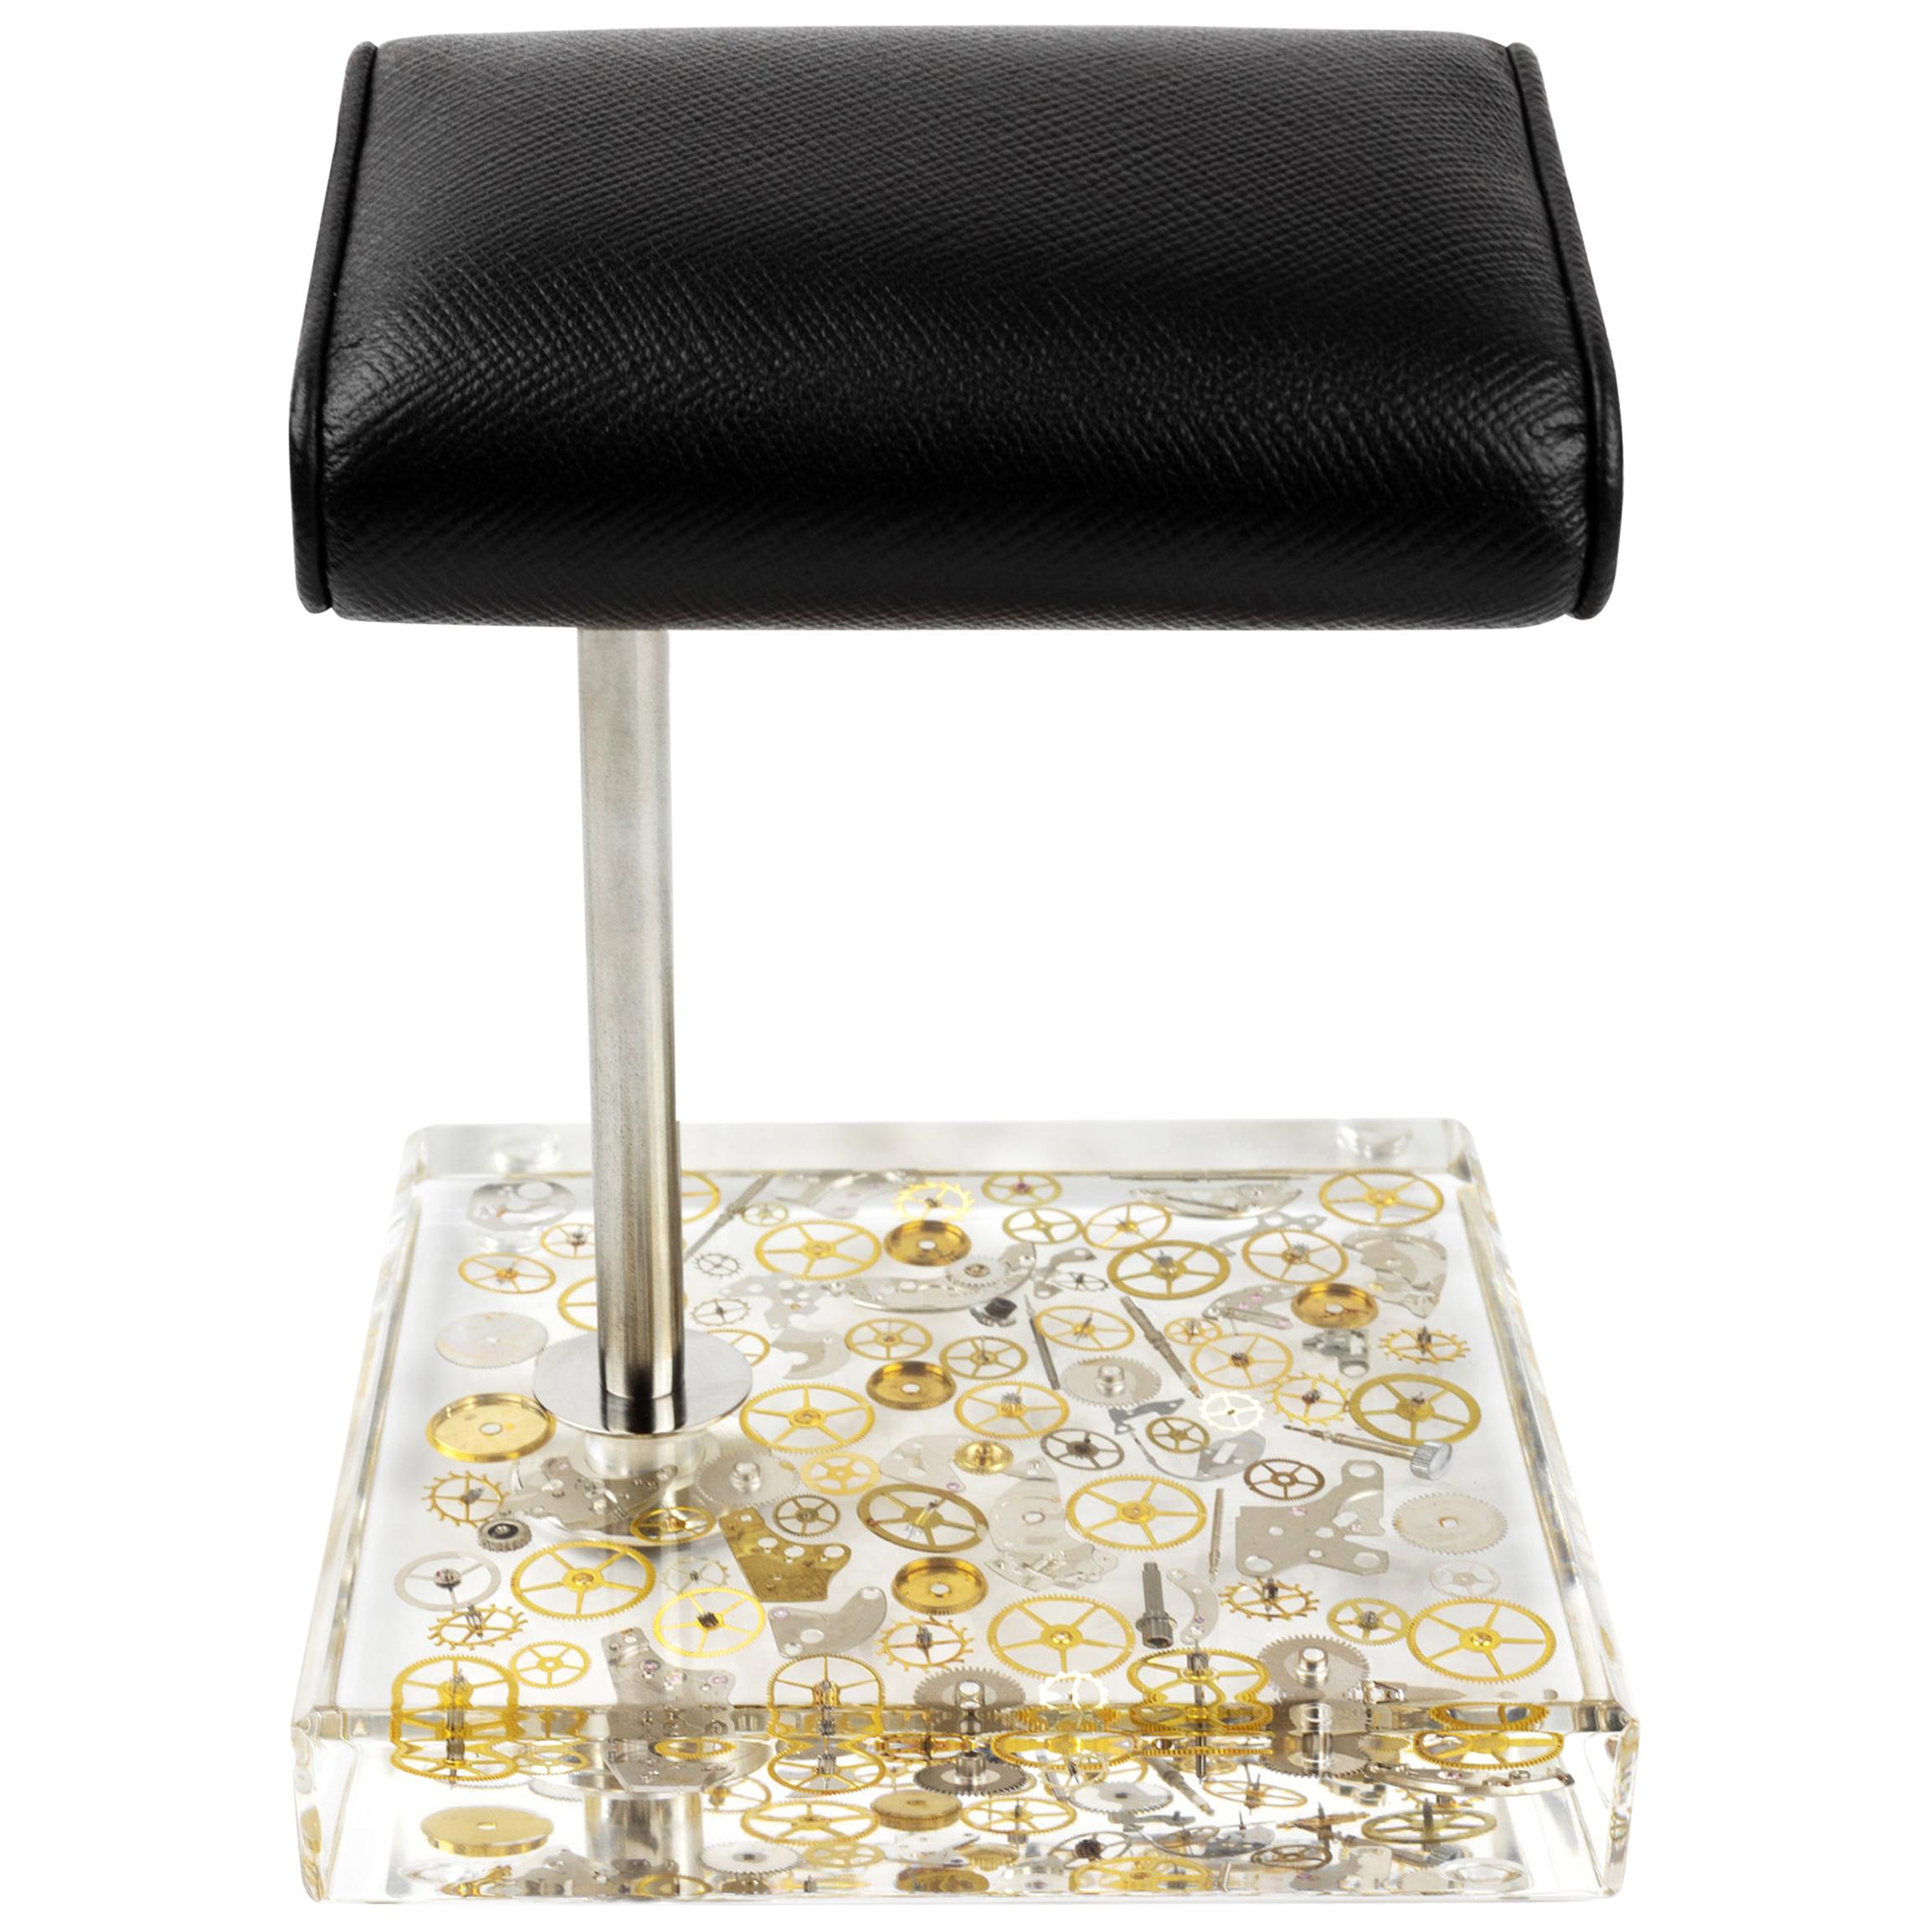 Berd Vay’e x the Watch Stand Fine Timepiece Lucite Desk Accessory 'Stainless'